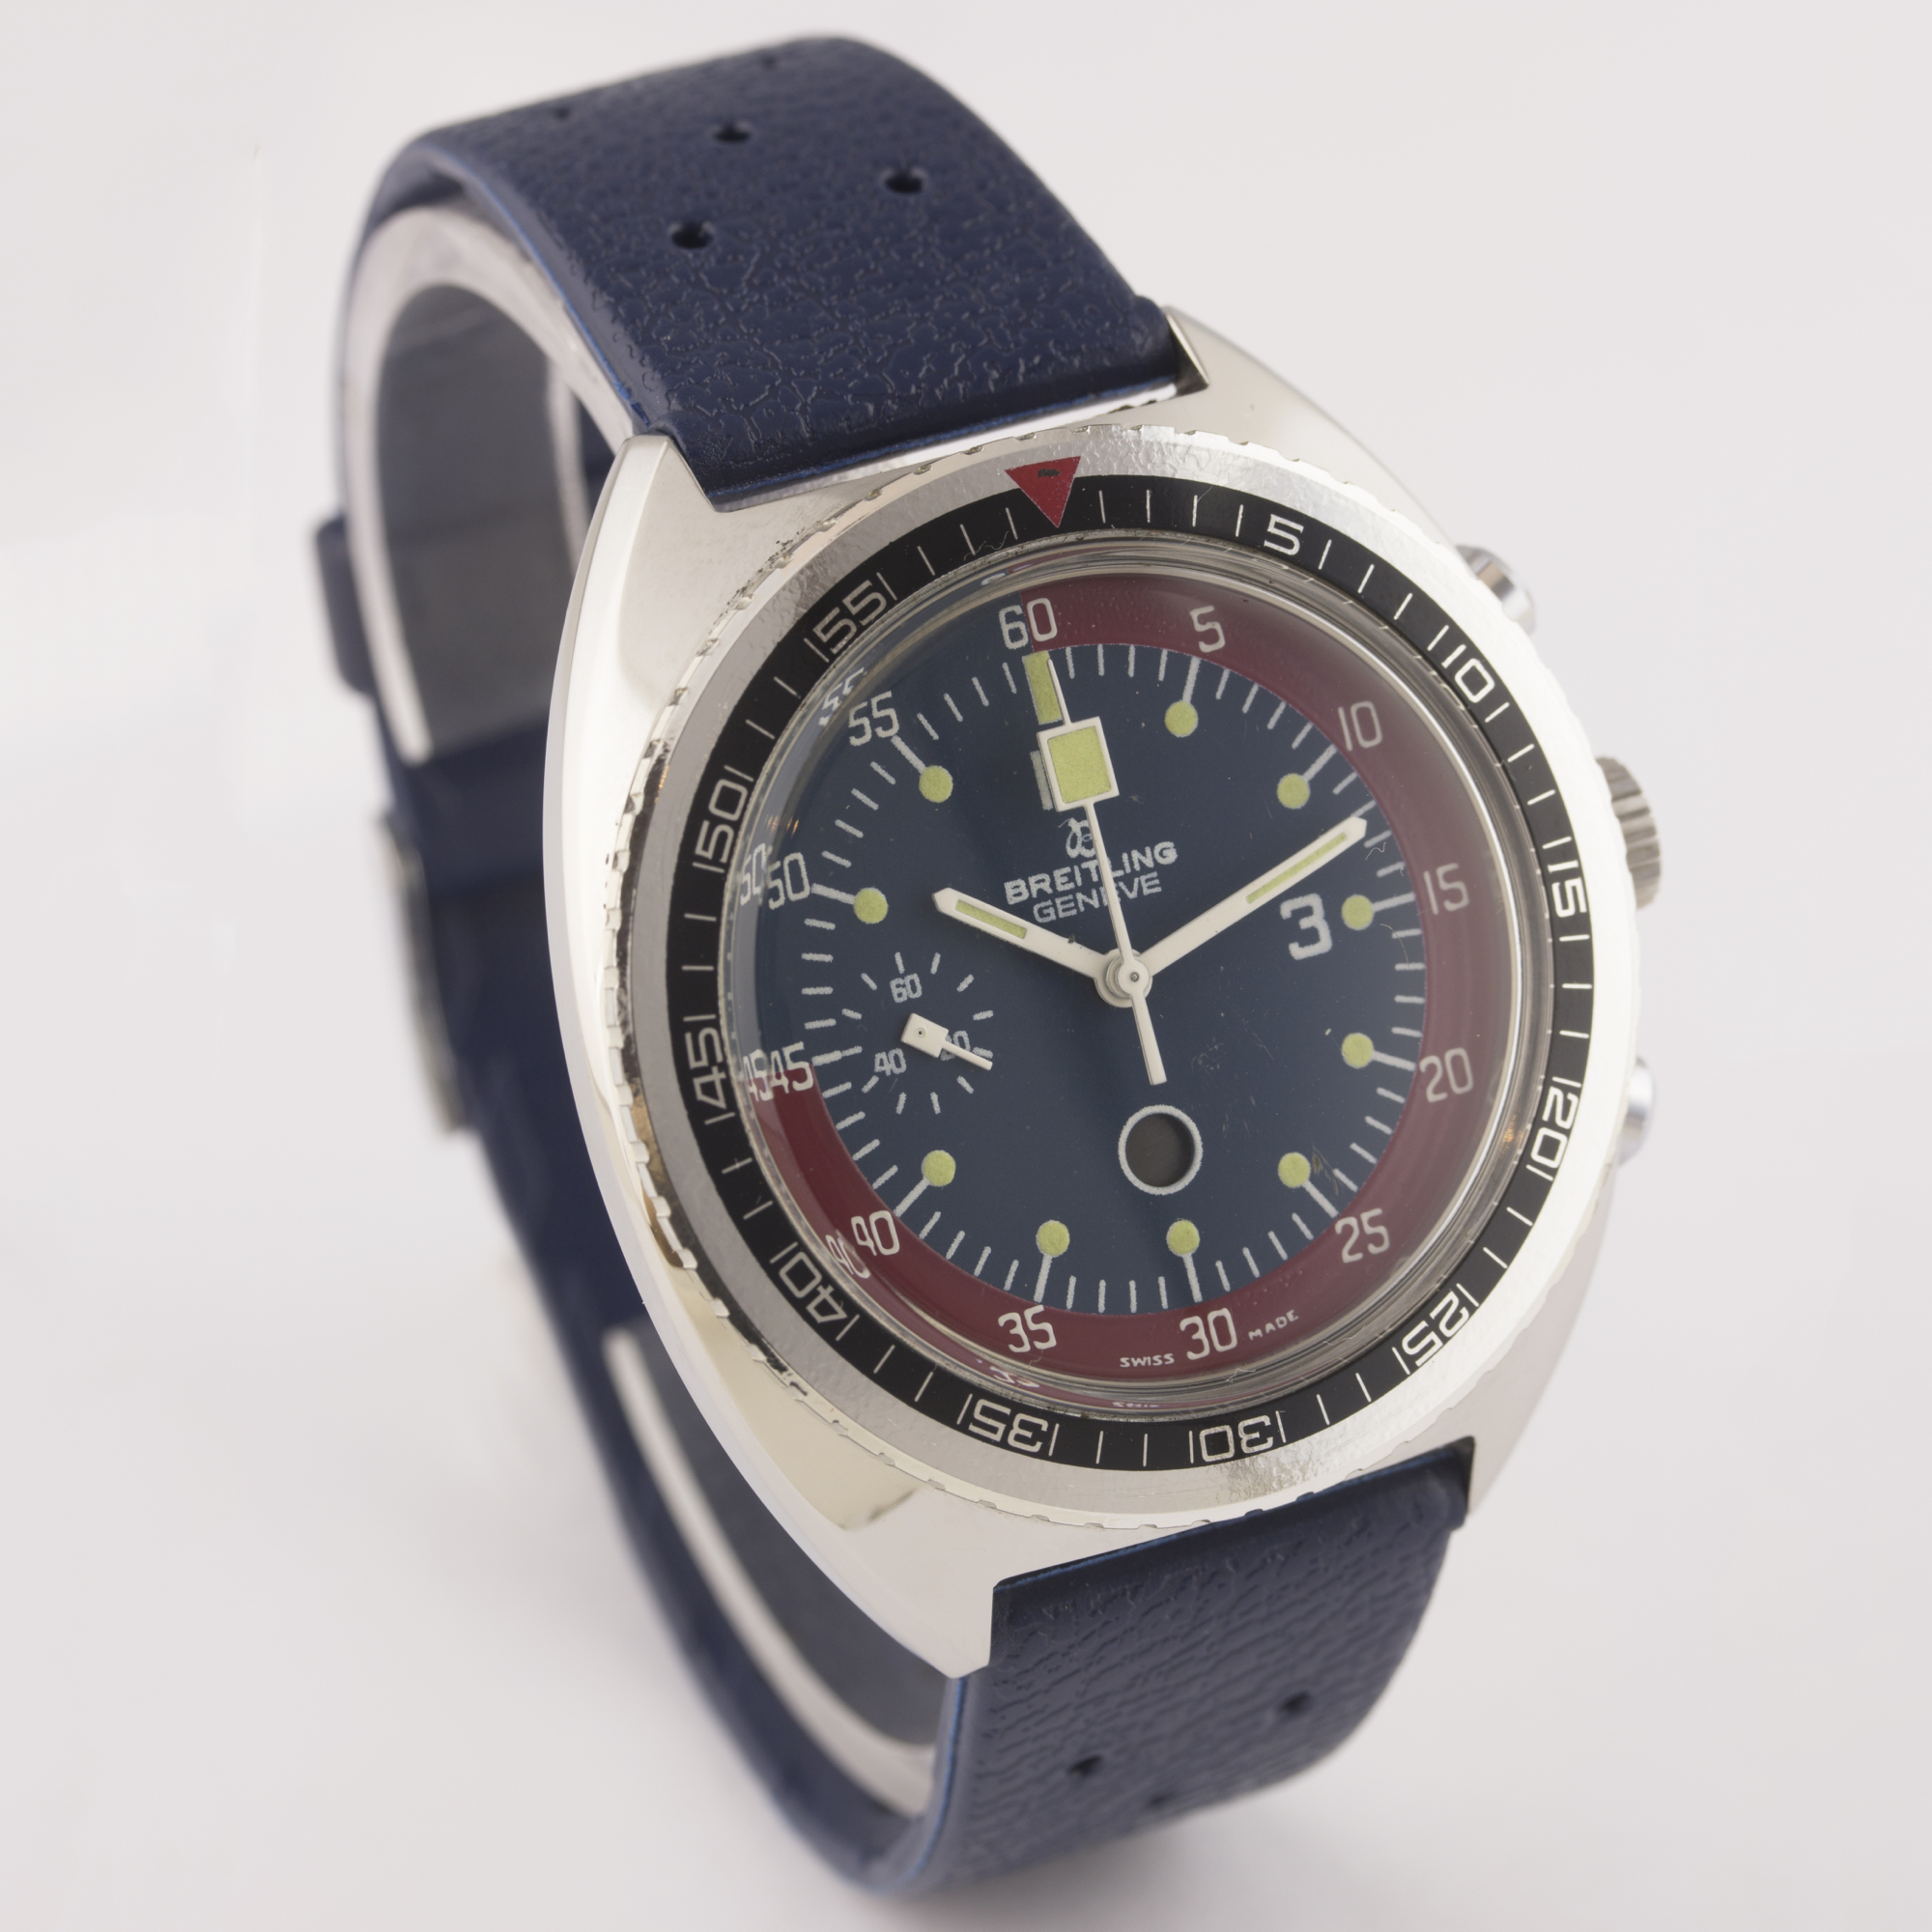 A RARE GENTLEMAN'S "NOS" STAINLESS STEEL BREITLING REFEREE "SOCCER TIMER" CHRONOGRAPH WRIST WATCH - Image 6 of 10